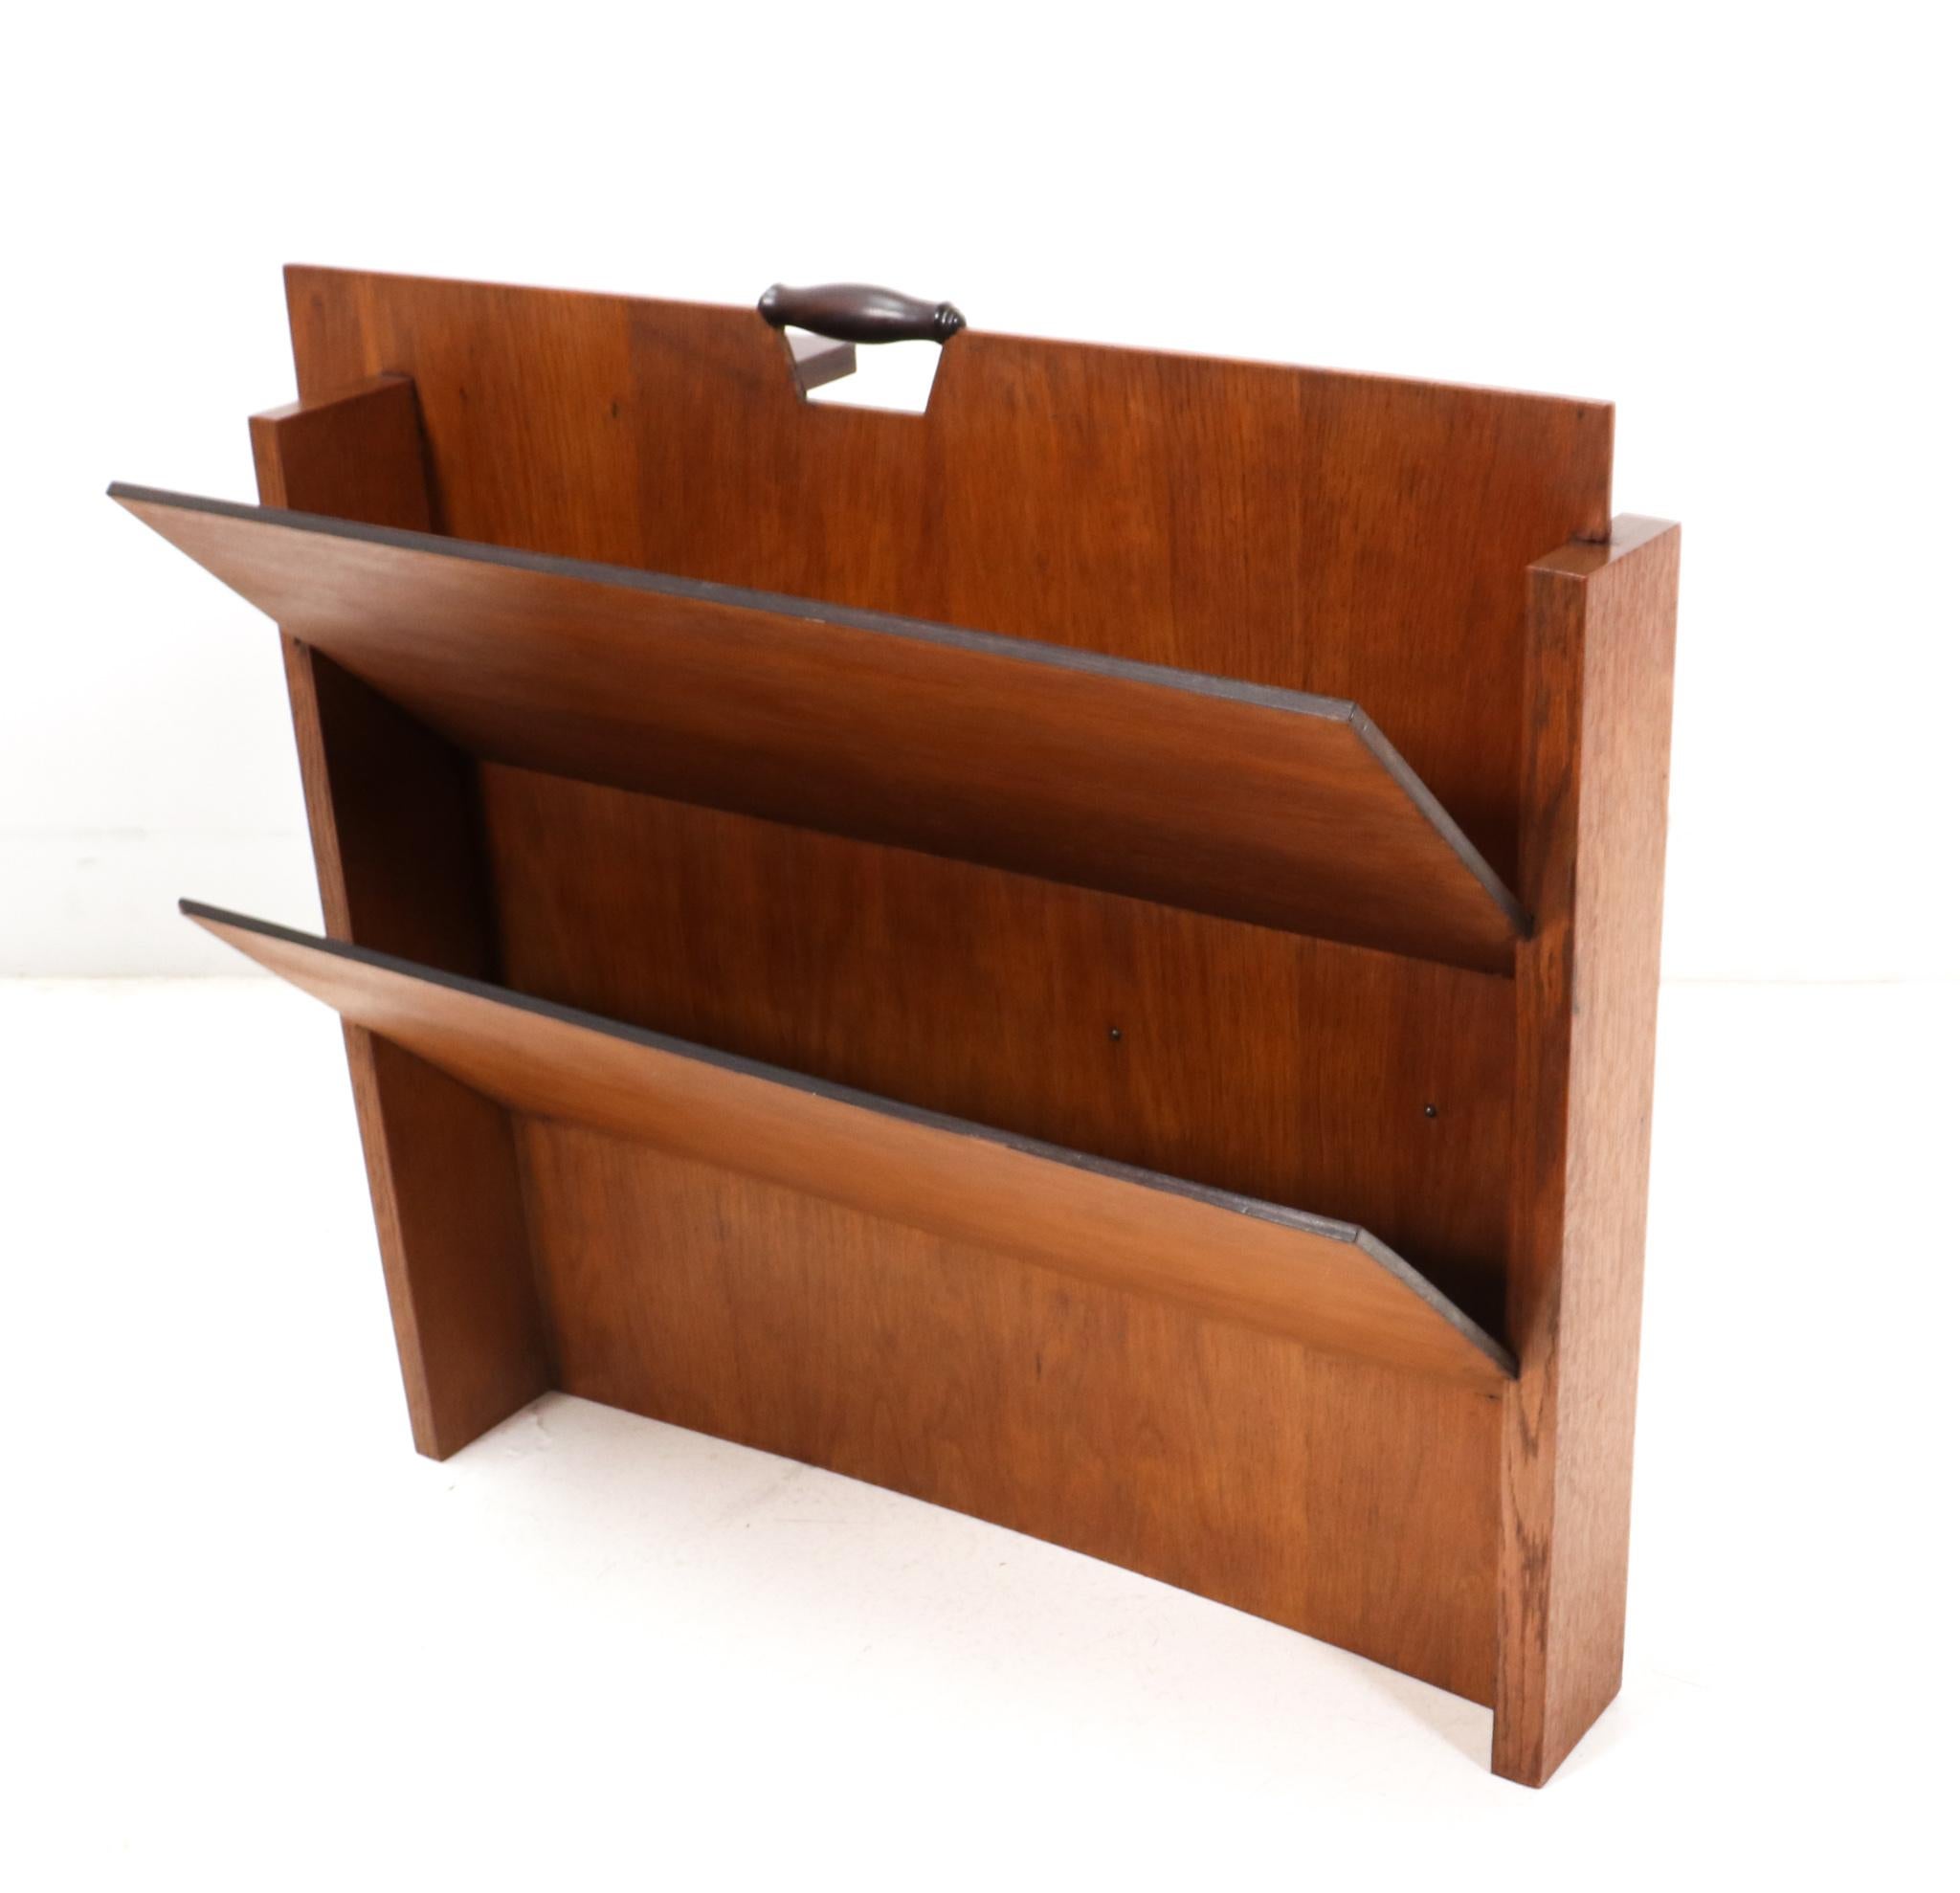 Oak Art Deco Modernist Magazine Rack by Frits Spanjaard, 1920s In Good Condition For Sale In Amsterdam, NL